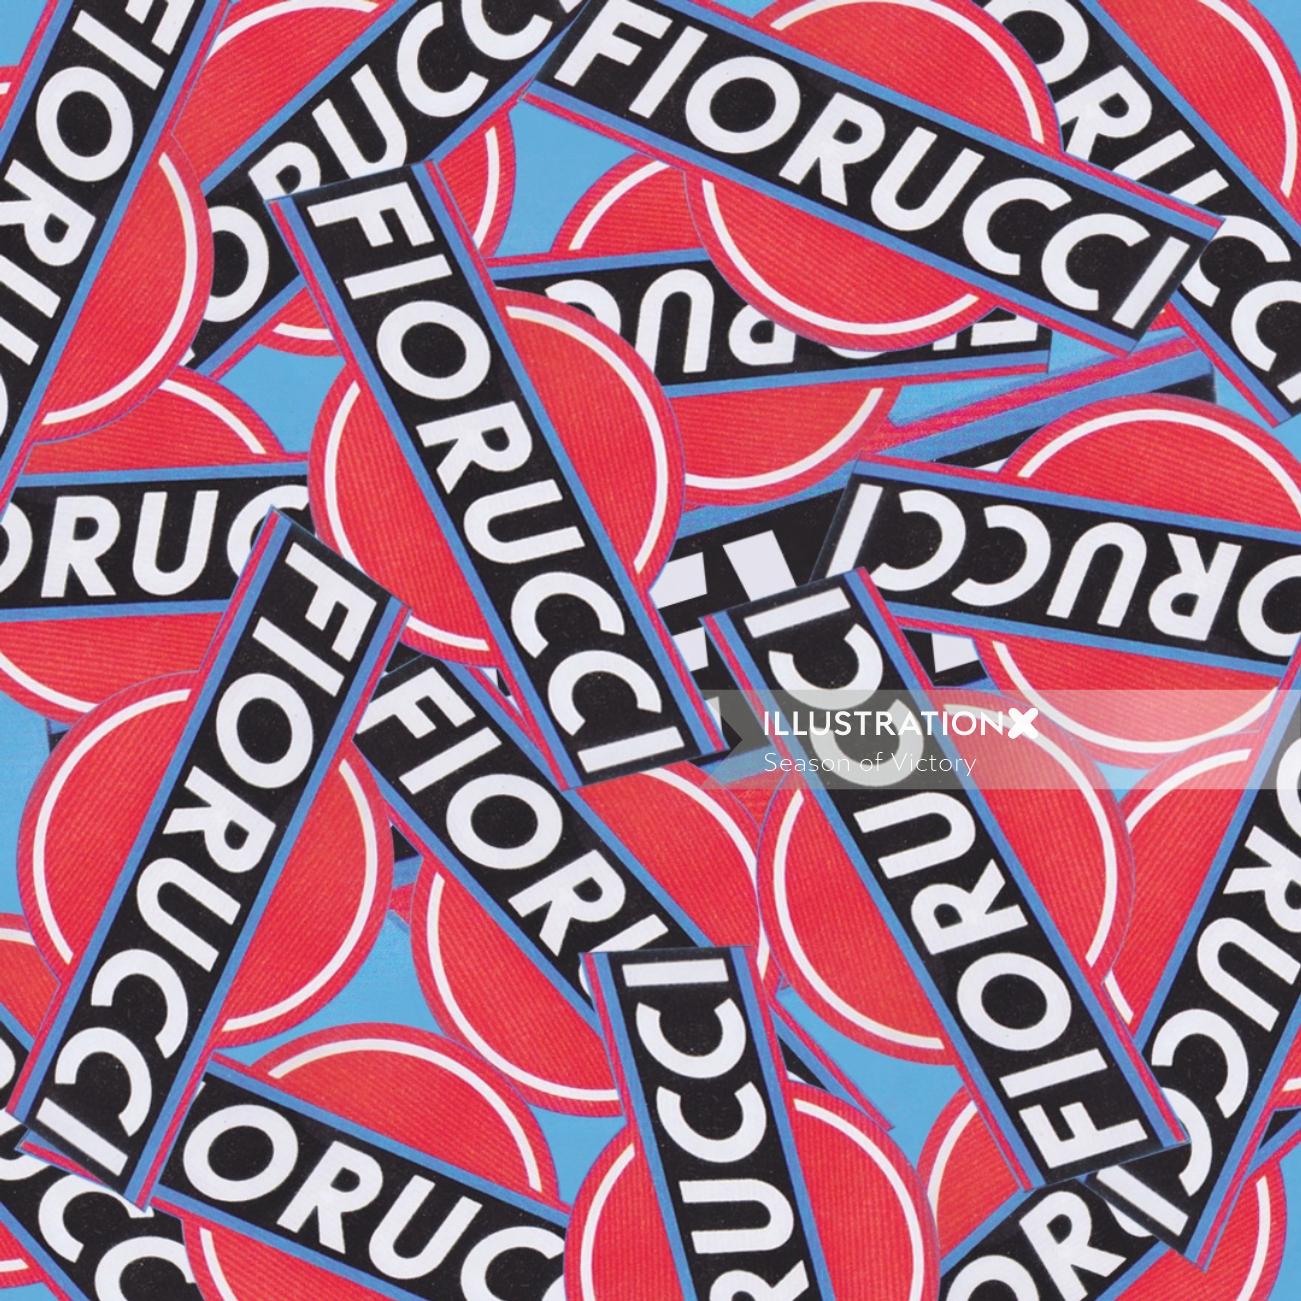 Fiorucci forever retro and pop mixed gif animation